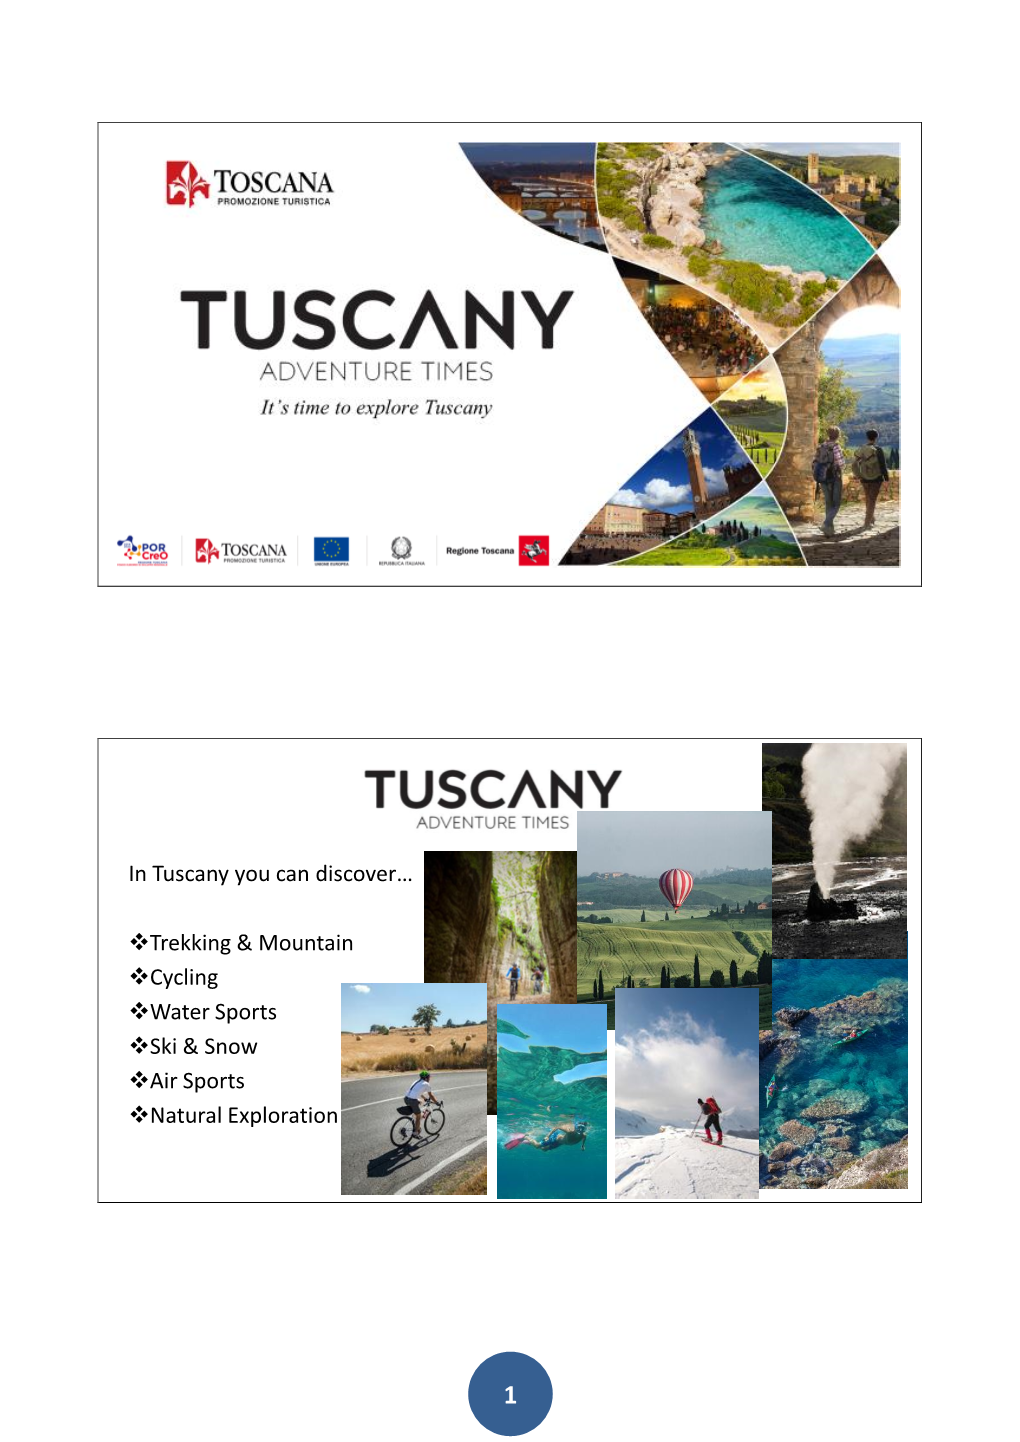 Download the Tuscan Adventure Times Brochure